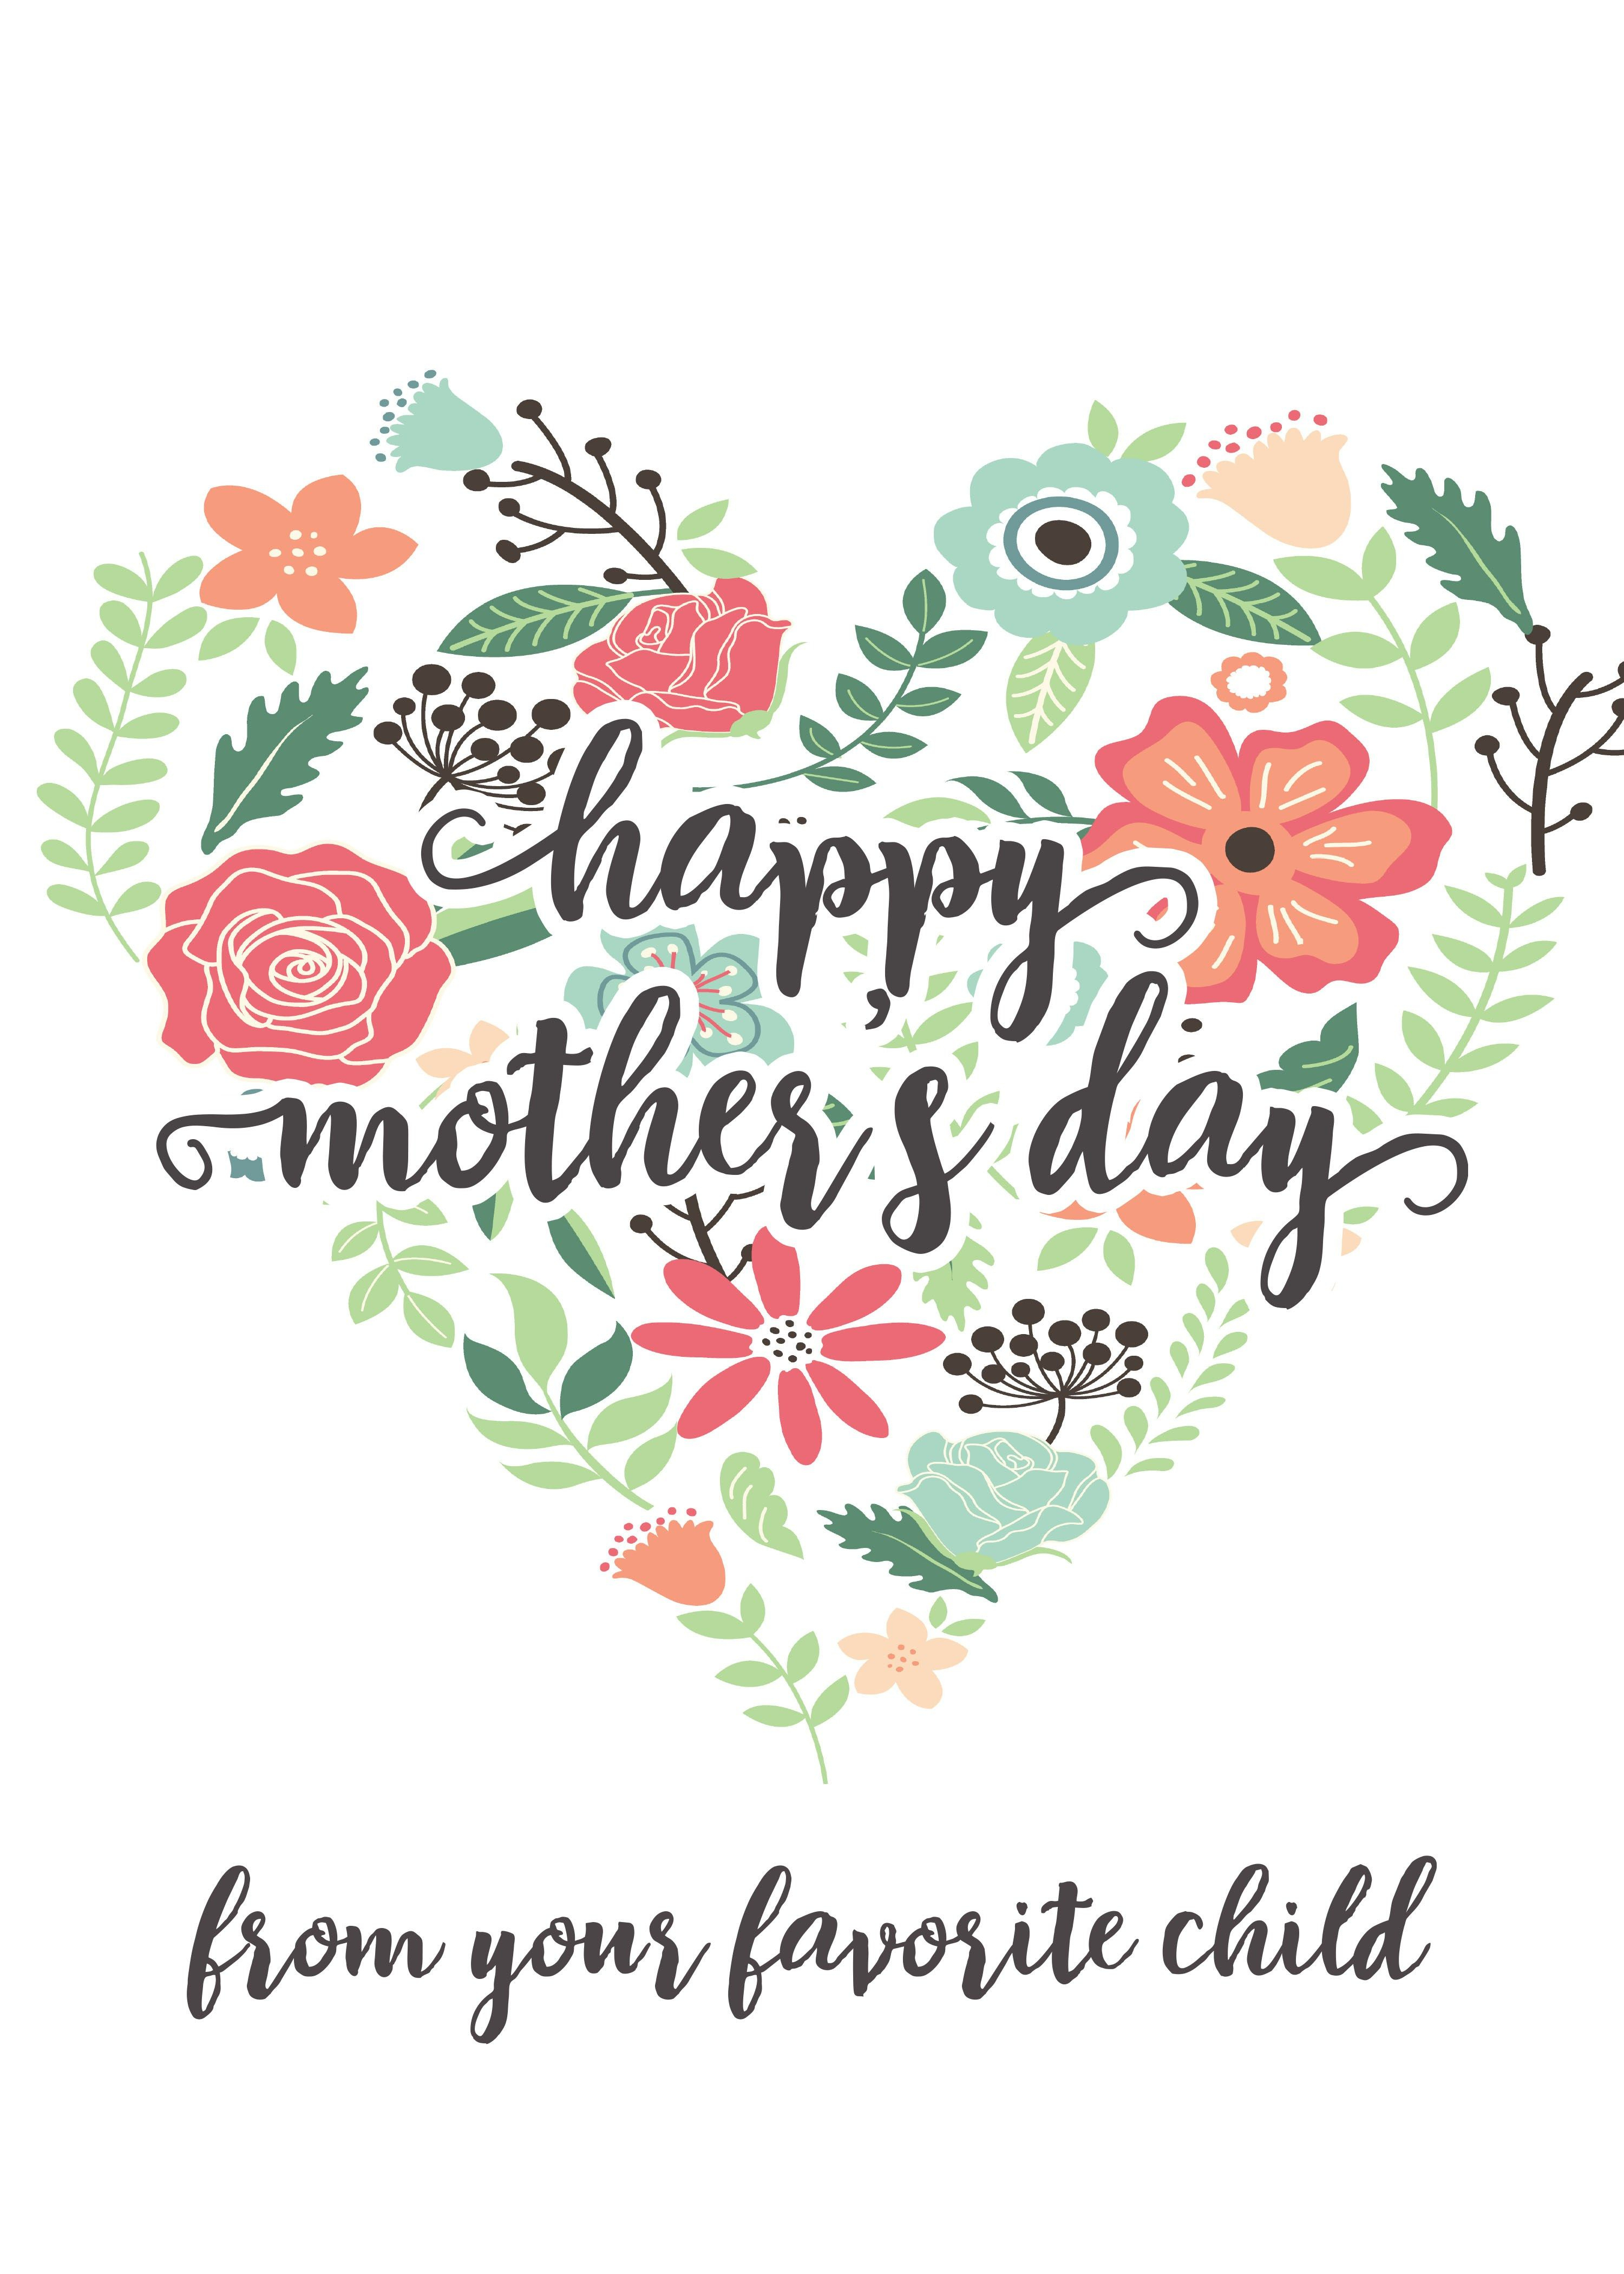 Happy Mothers Day Messages Free Printable Mothers Day Cards - Free Printable Mothers Day Cards